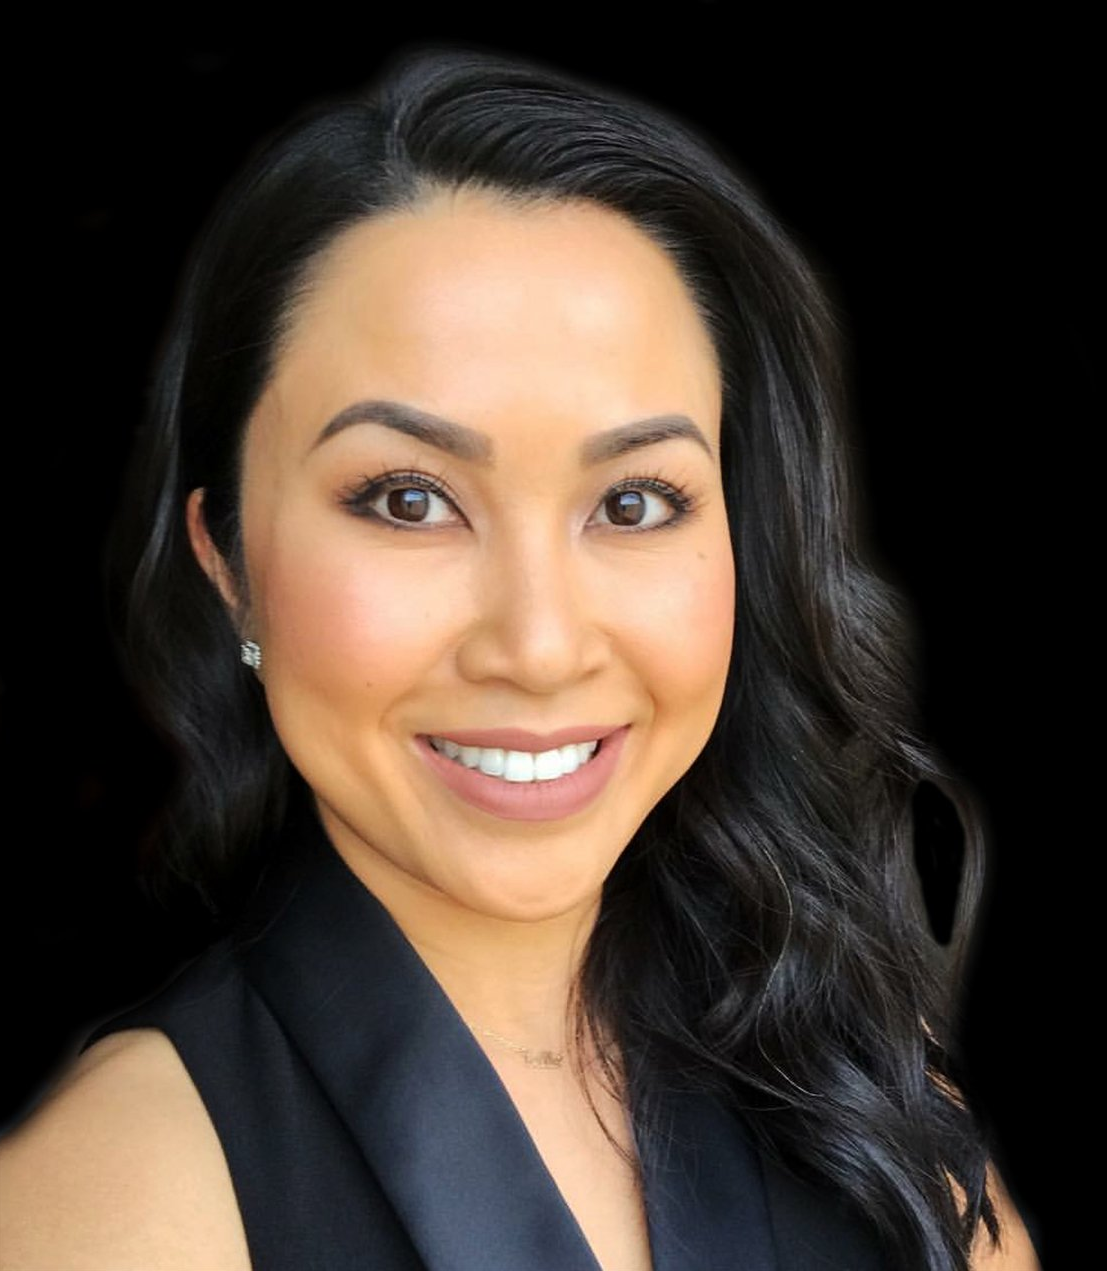 Christine Le Owner of Permanent Impression - Microblading Eyebrows